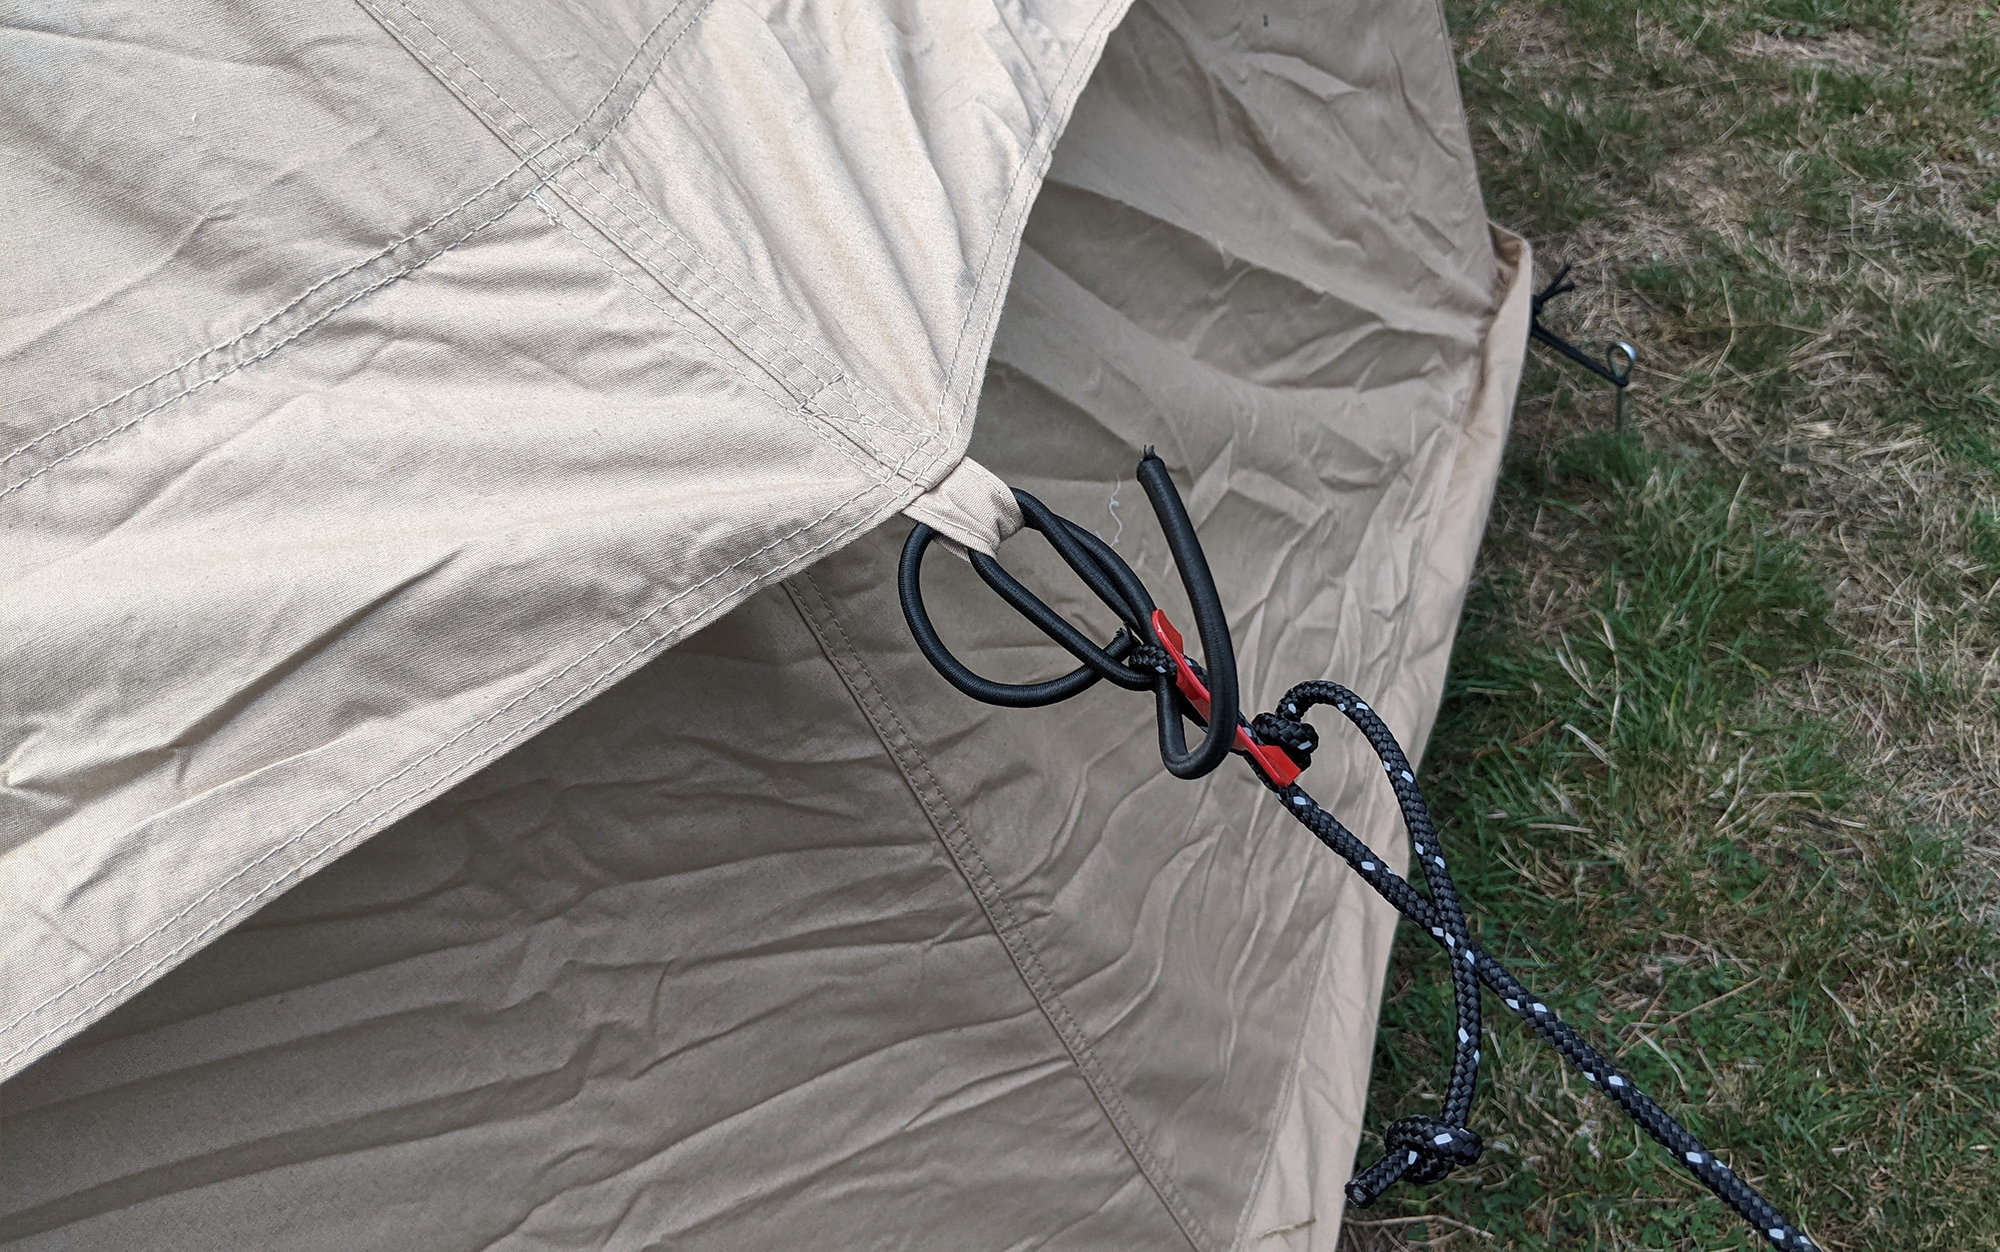 The loops that hold the guylines to the tent have a tendency to unravel.